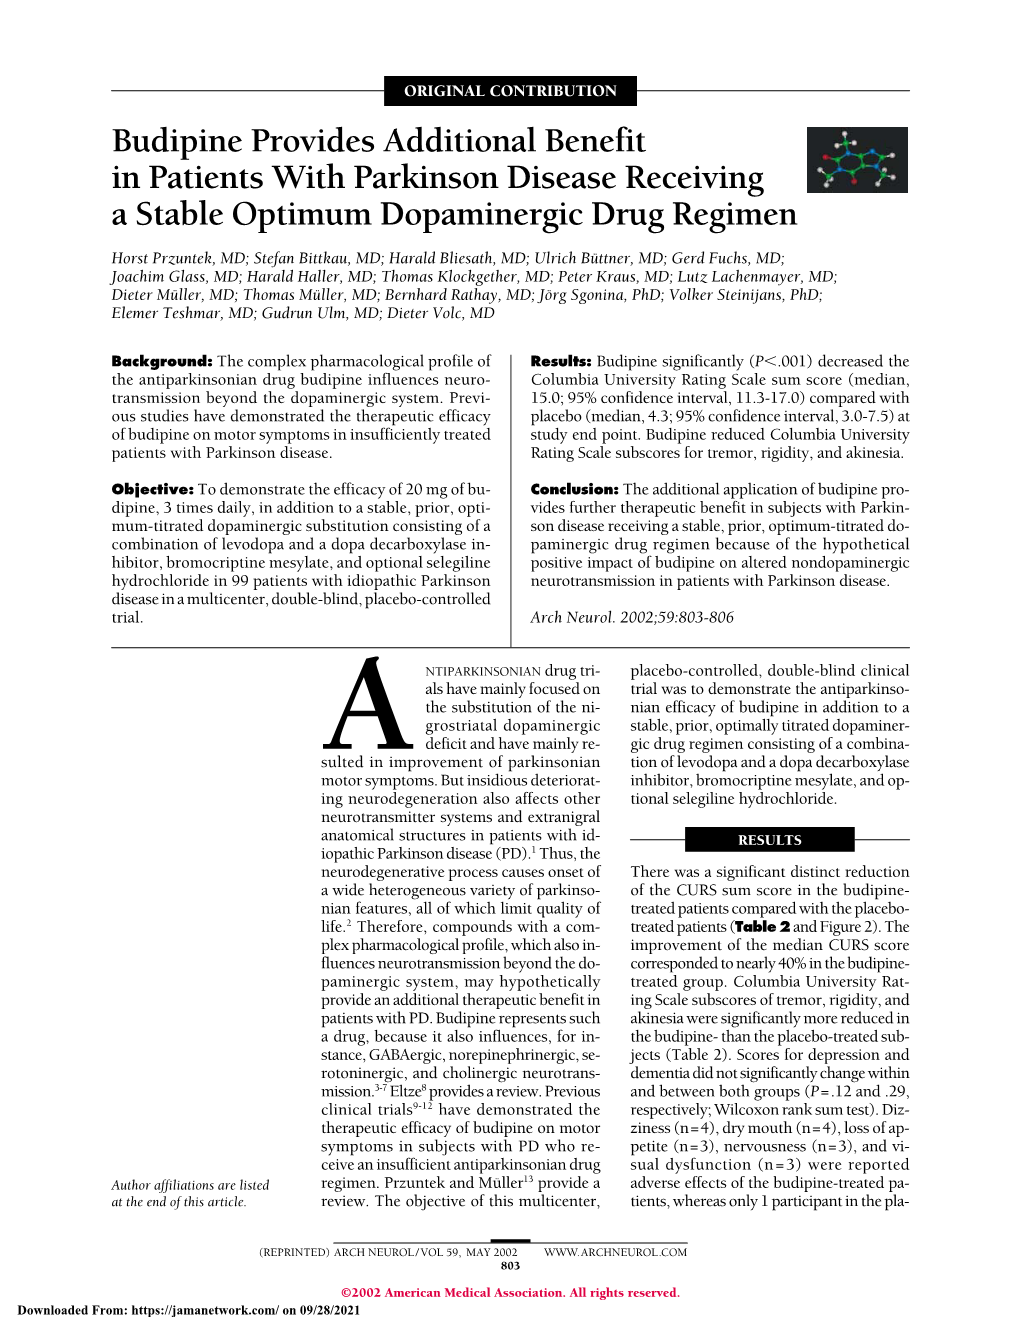 Budipine Provides Additional Benefit in Patients with Parkinson Disease Receiving a Stable Optimum Dopaminergic Drug Regimen